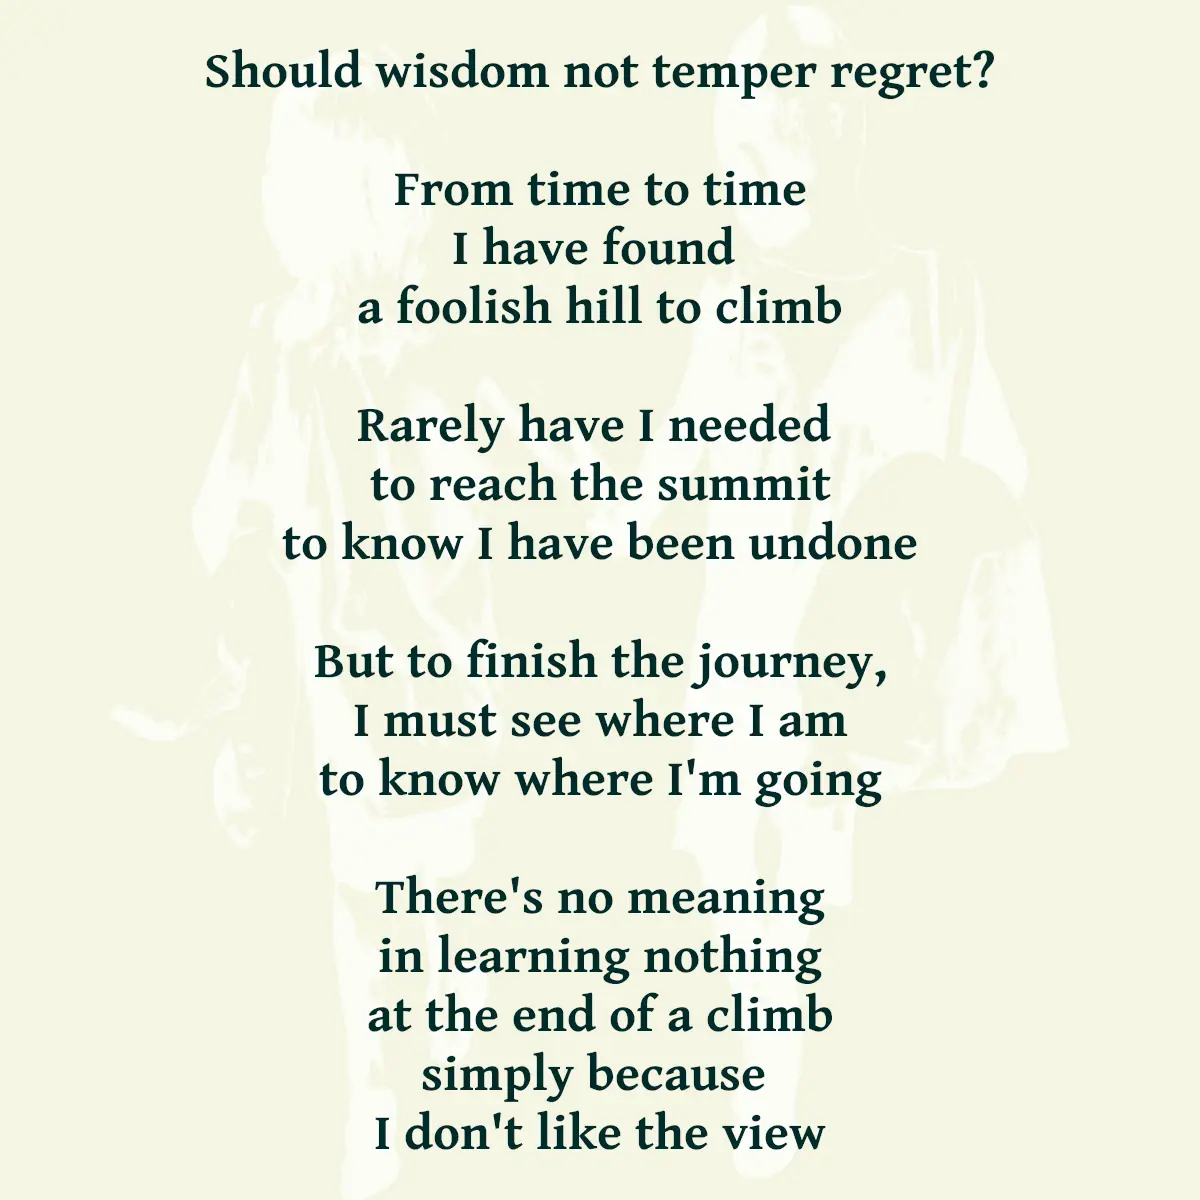 Should wisdom not temper regret? From time to time I have found a foolish hill to climb Rarely have I needed to reach the summit to know I have been undone But to finish the journey, I must see where I am to know where I'm going There's no meaning in learning nothing at the end of a climb simply because I don't like the view